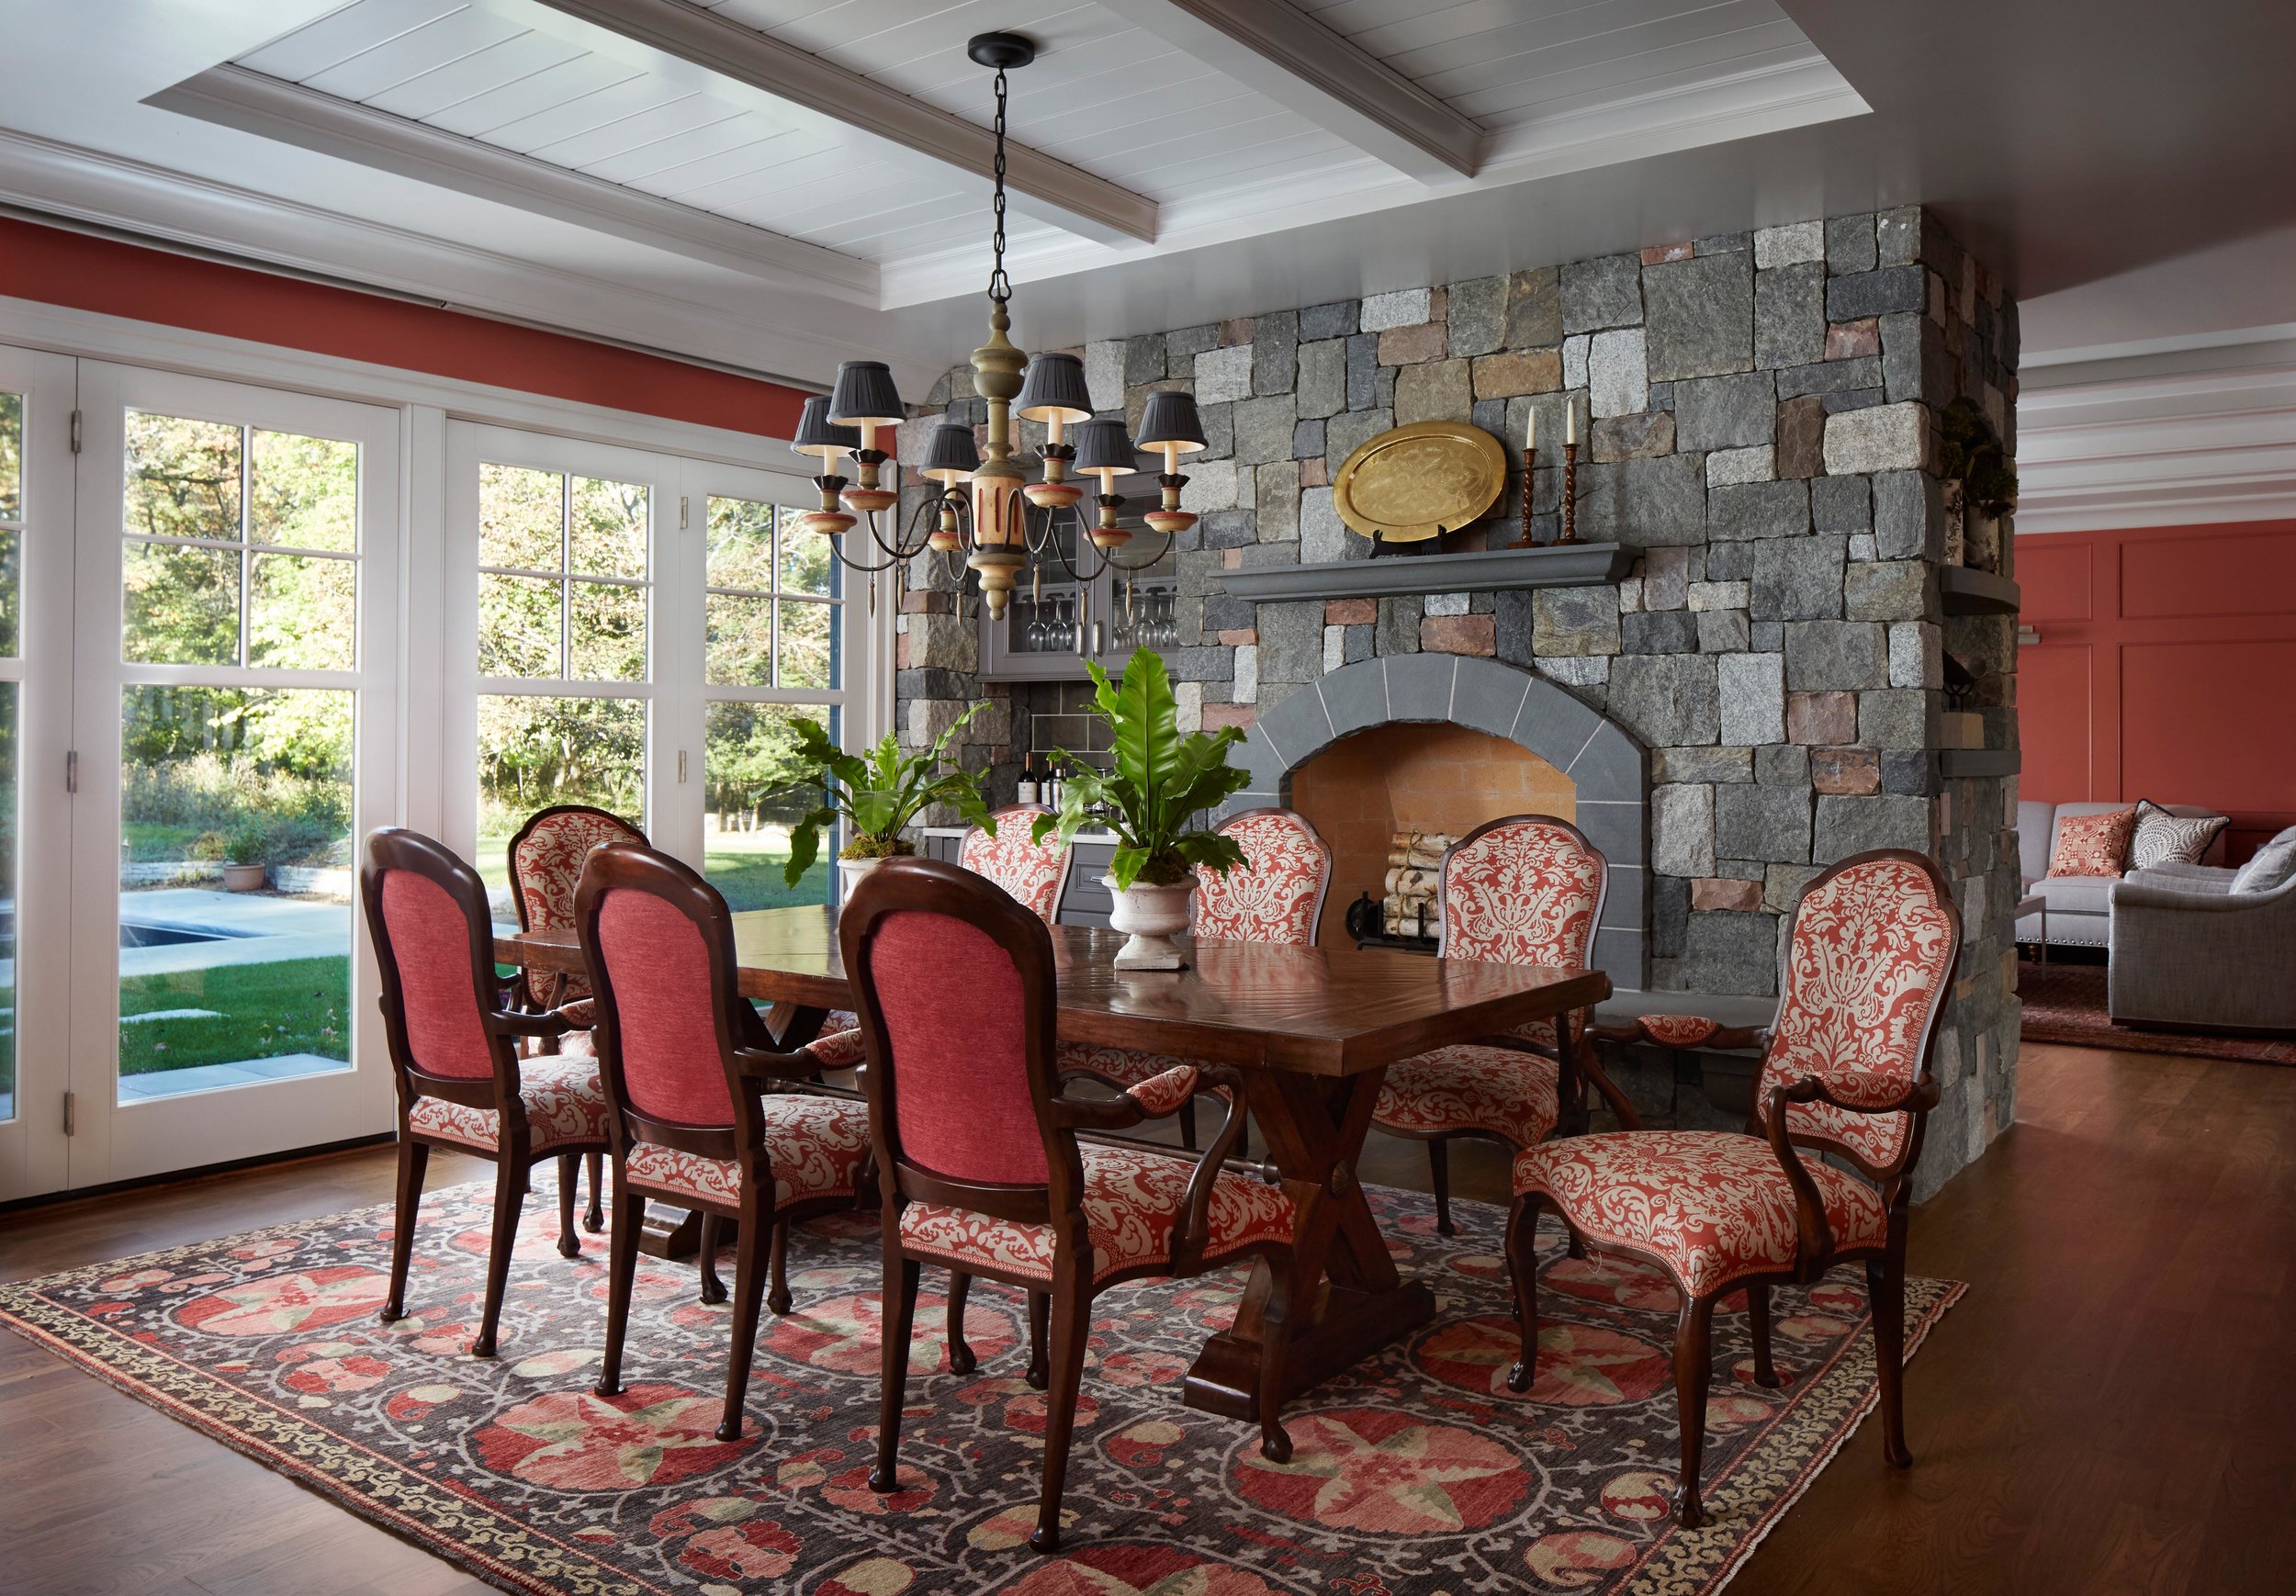 Coral walls and accents in a classic dining room with fireplace. Come see more interior design inspiration from Elizabeth Drake. Photo by Werner Straube. #interiordesign #classicdesign #traditionaldecor #housetour #elizabethdrake